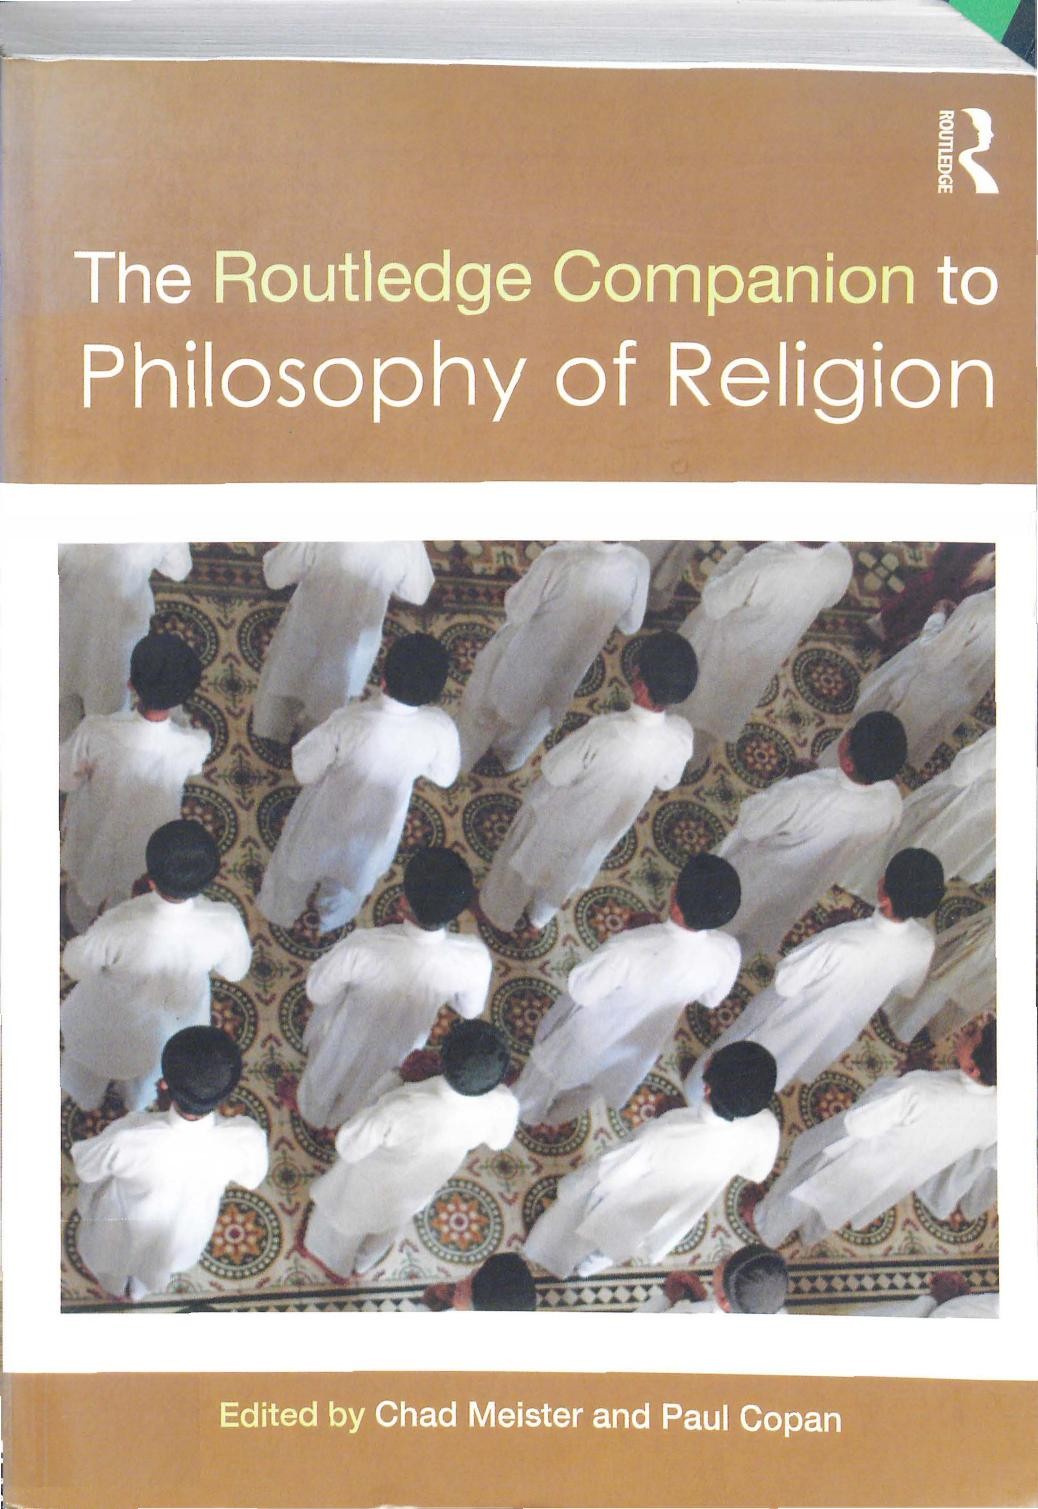 The Routledge Companion to Philosophy of Religion - Parts 5-9